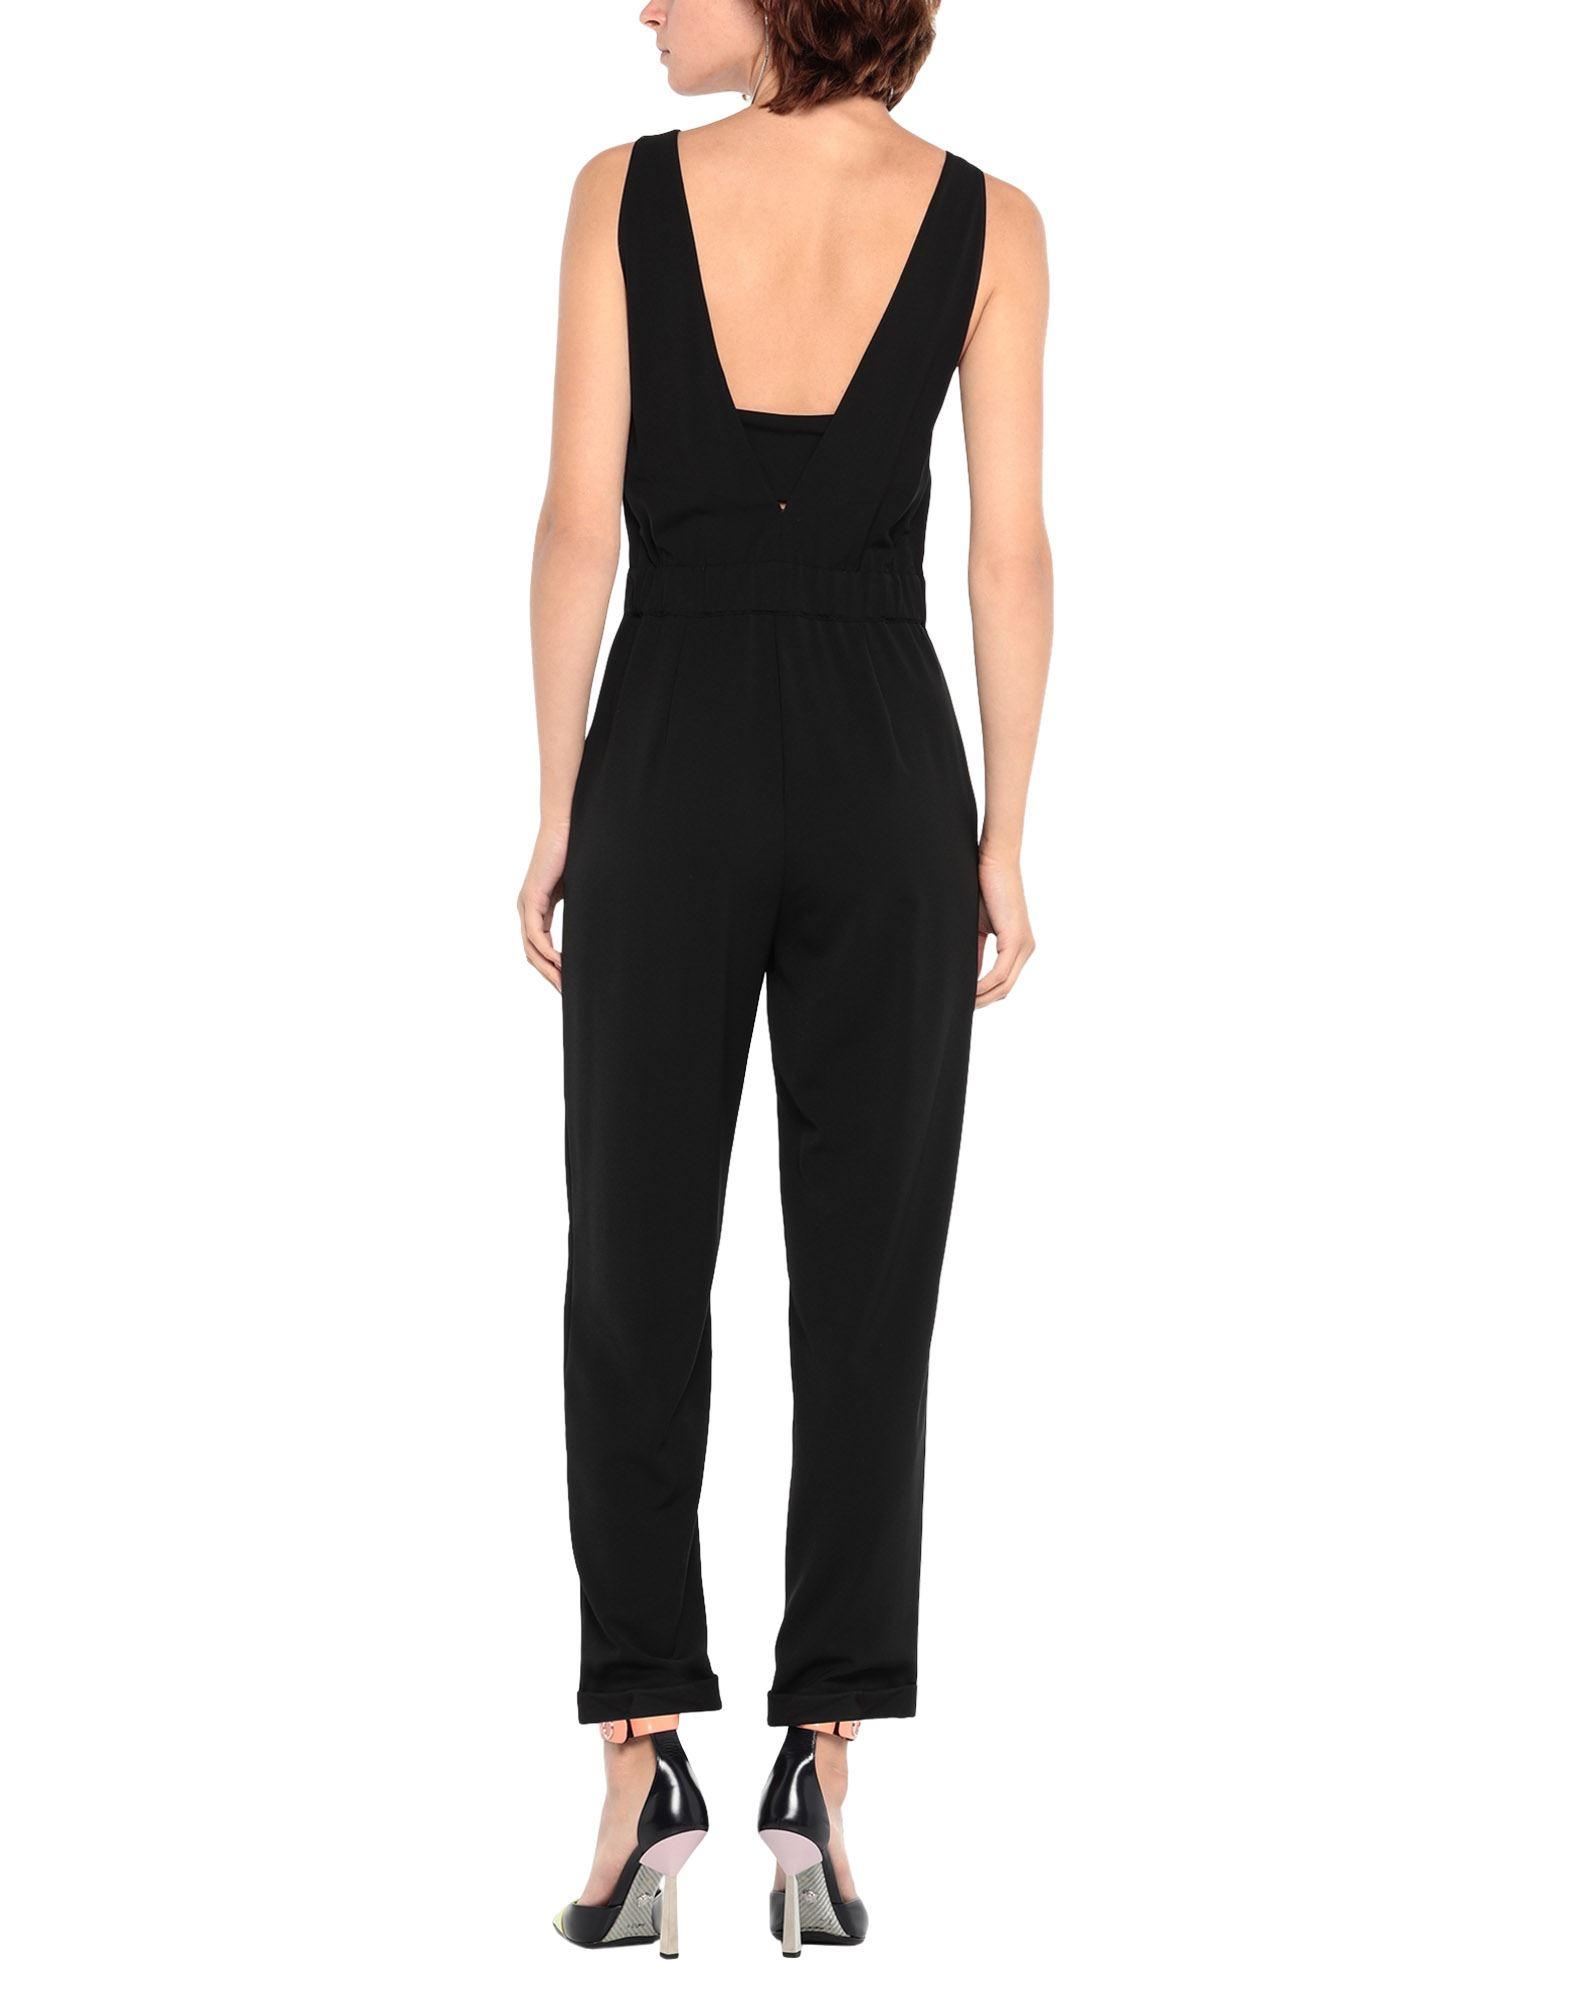 Patrizia Pepe Synthetic Jumpsuit in Black - Lyst